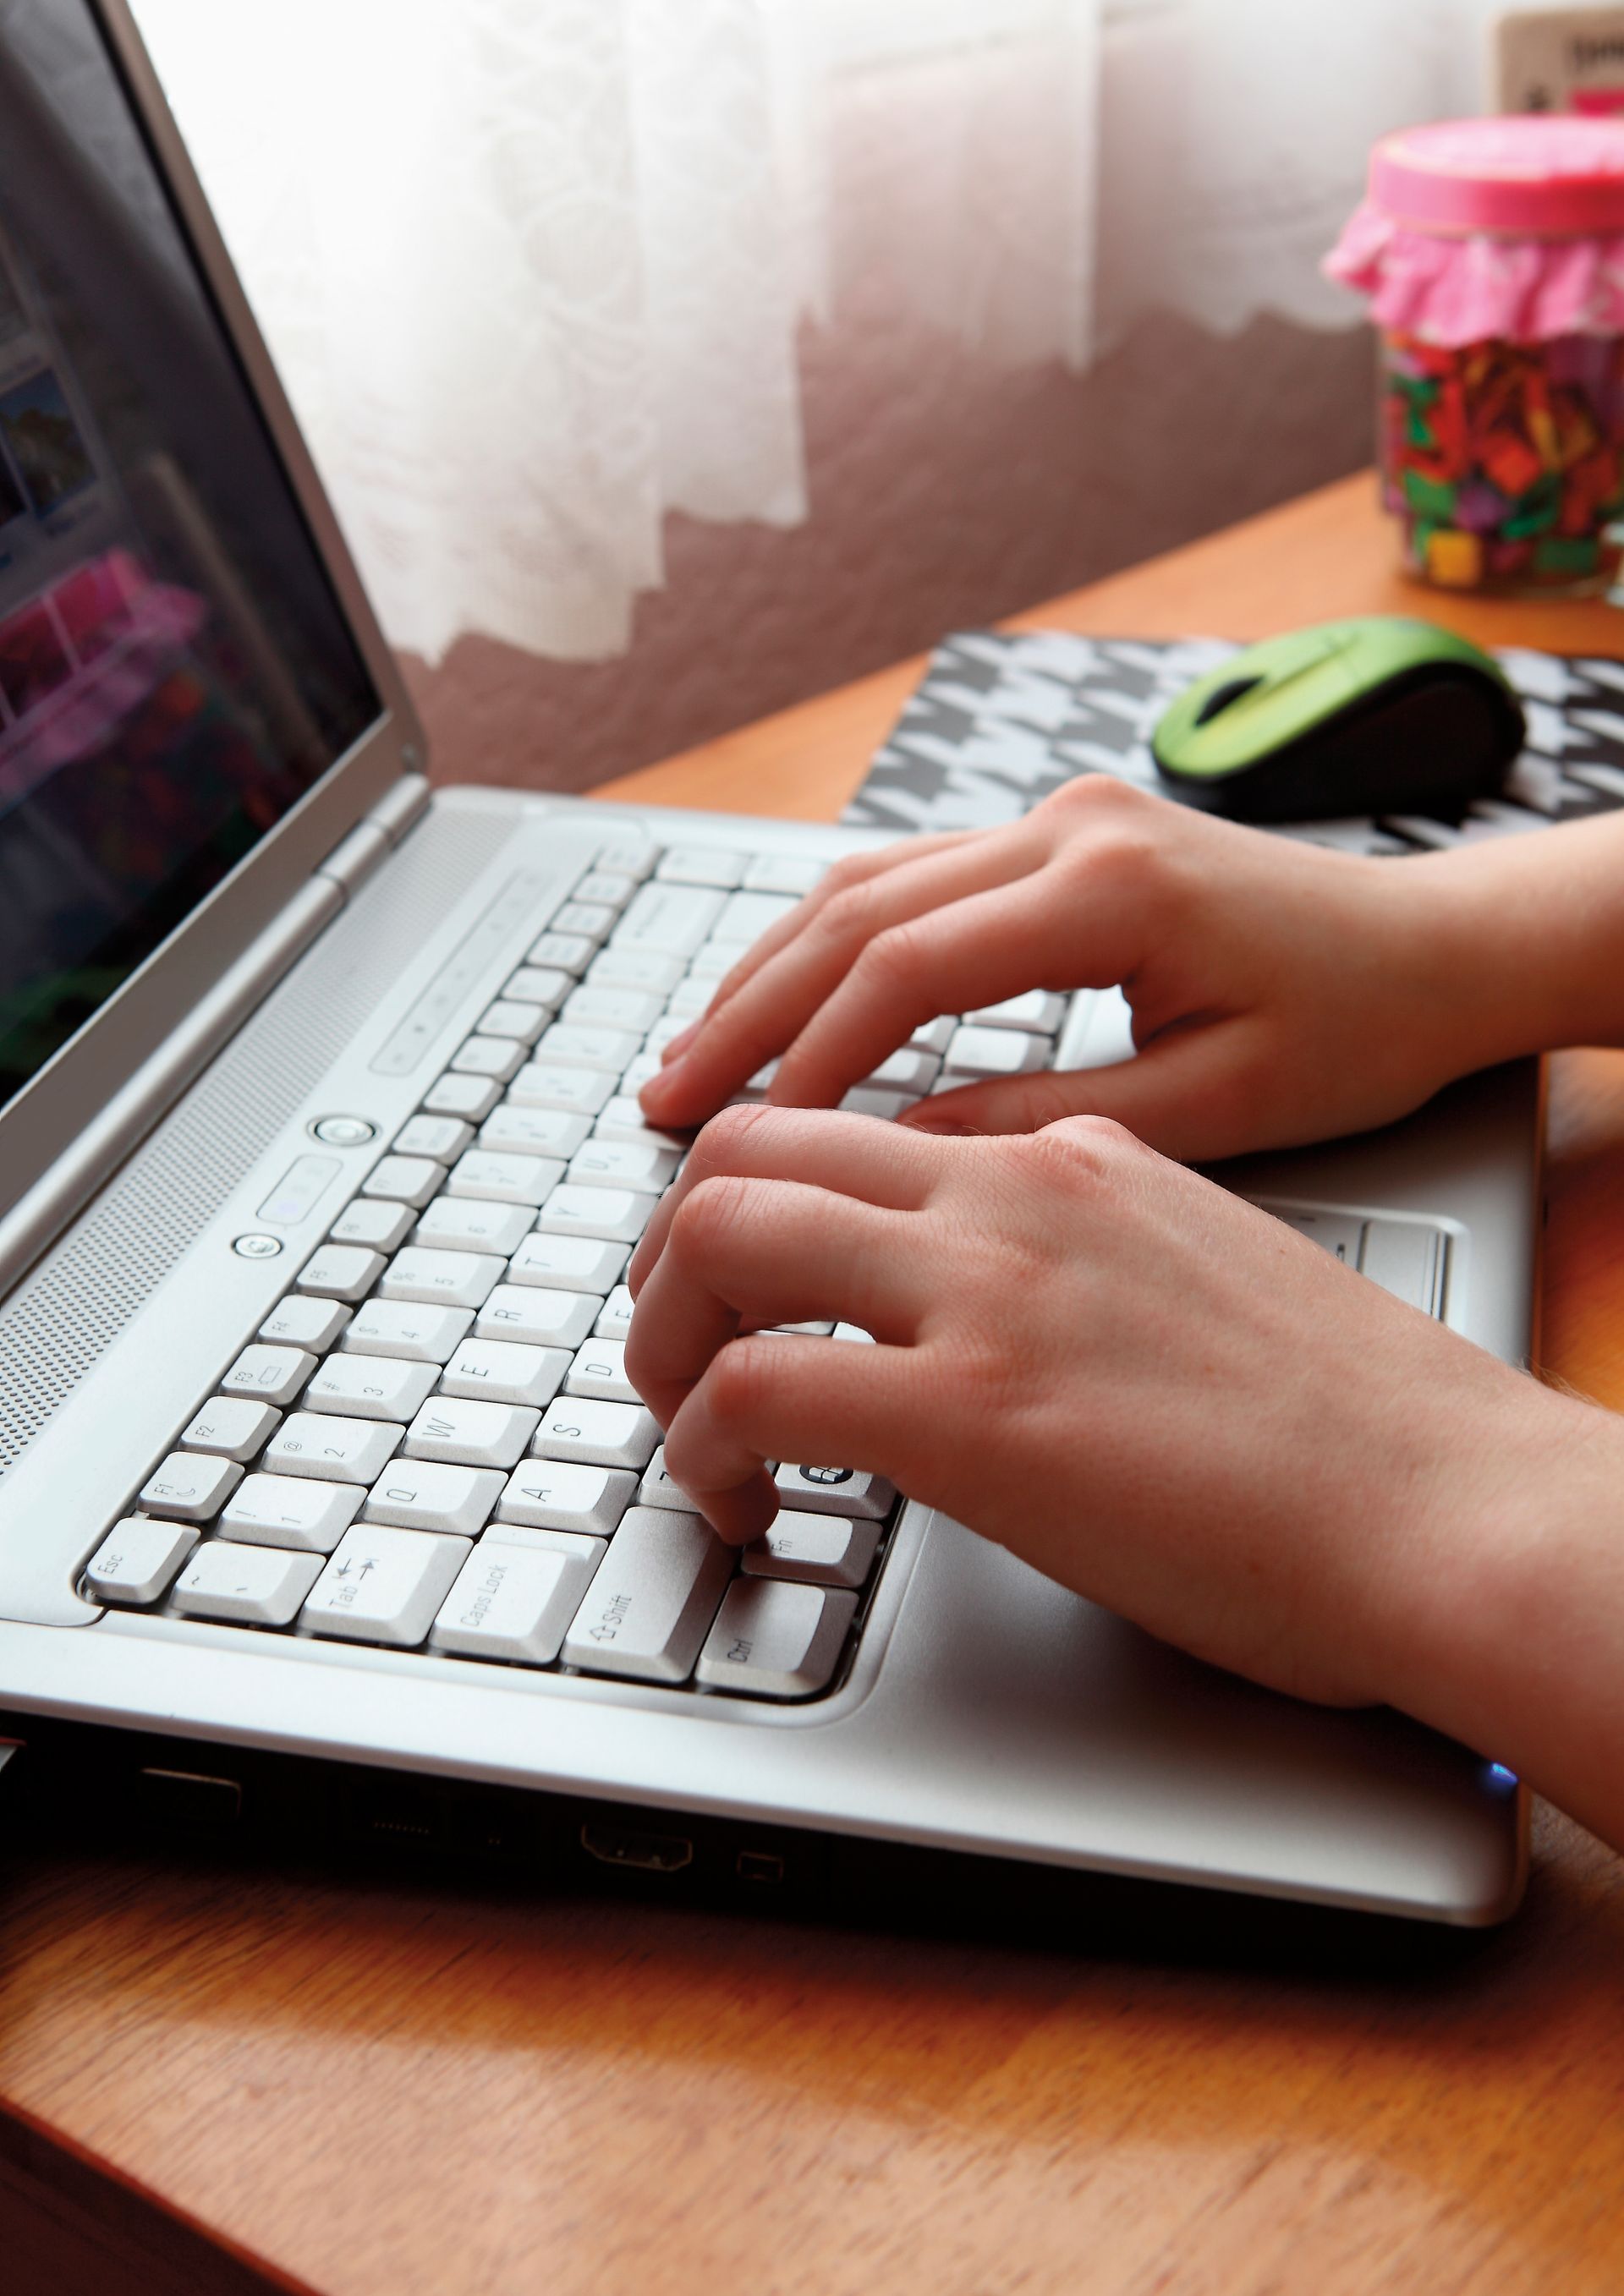 Hands are seen typing on a laptop.